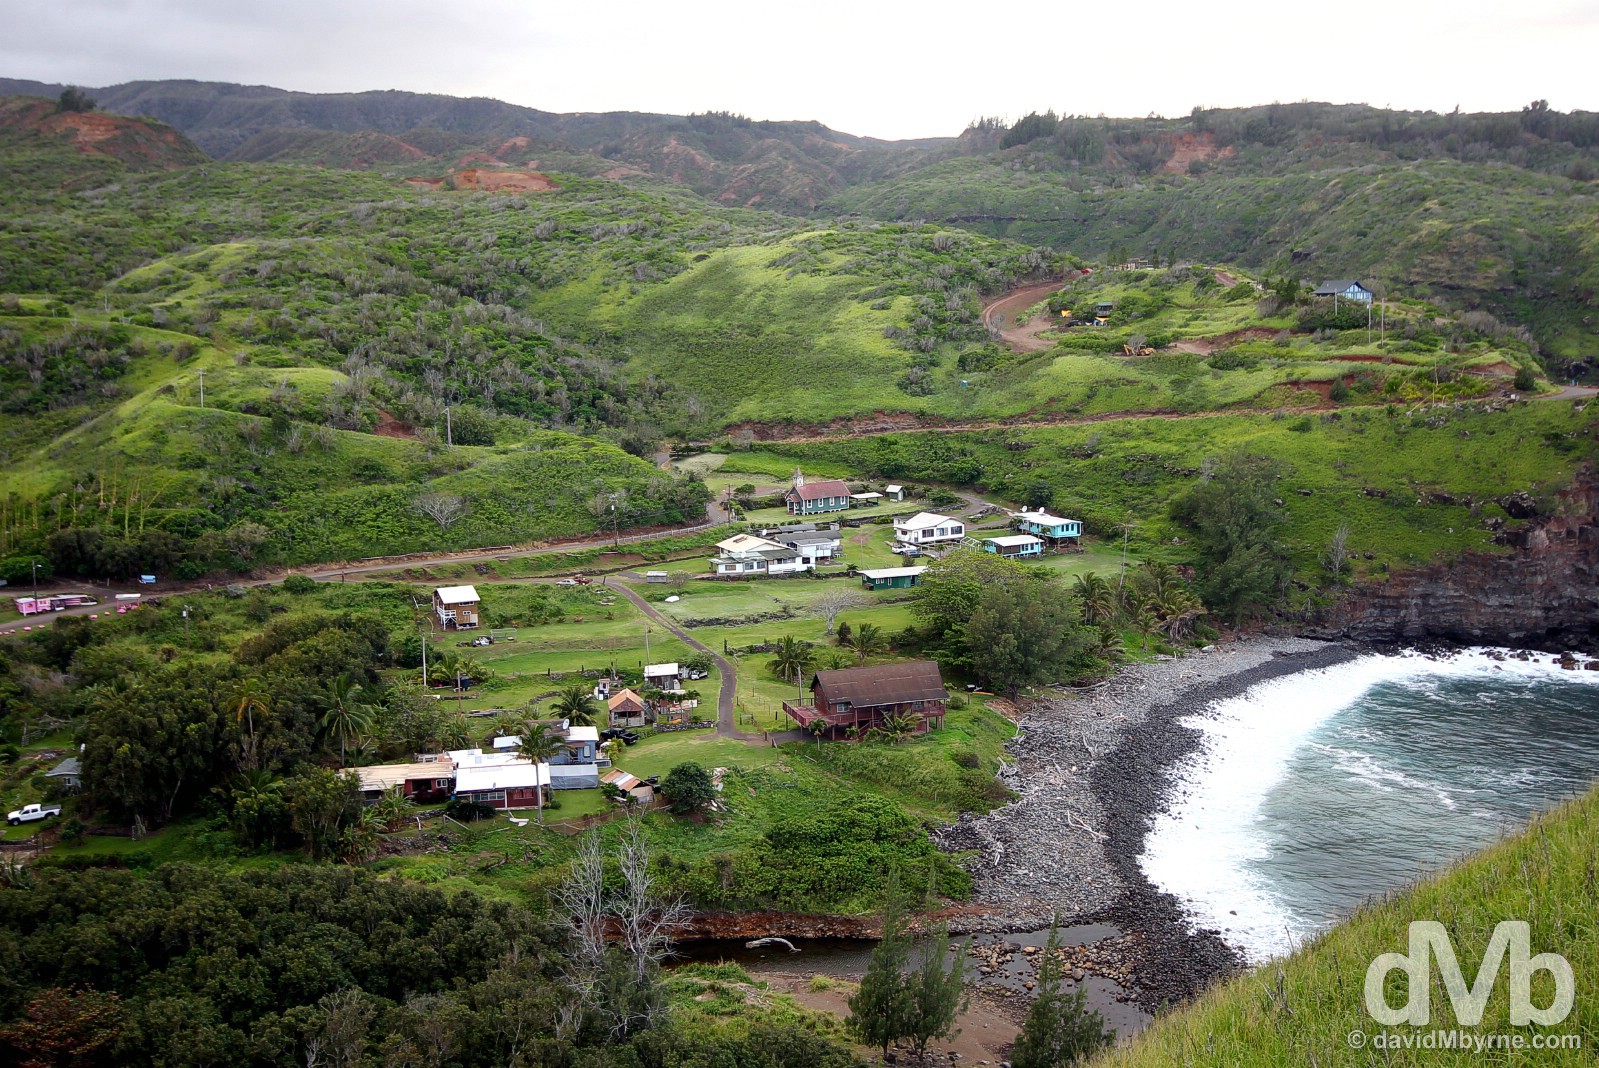 A small settlement off State Highway (yes, 'highway') 340, a.k.a. the Kahekili Highway, in remote western Maui, Hawaii, USA. March 4, 2013.